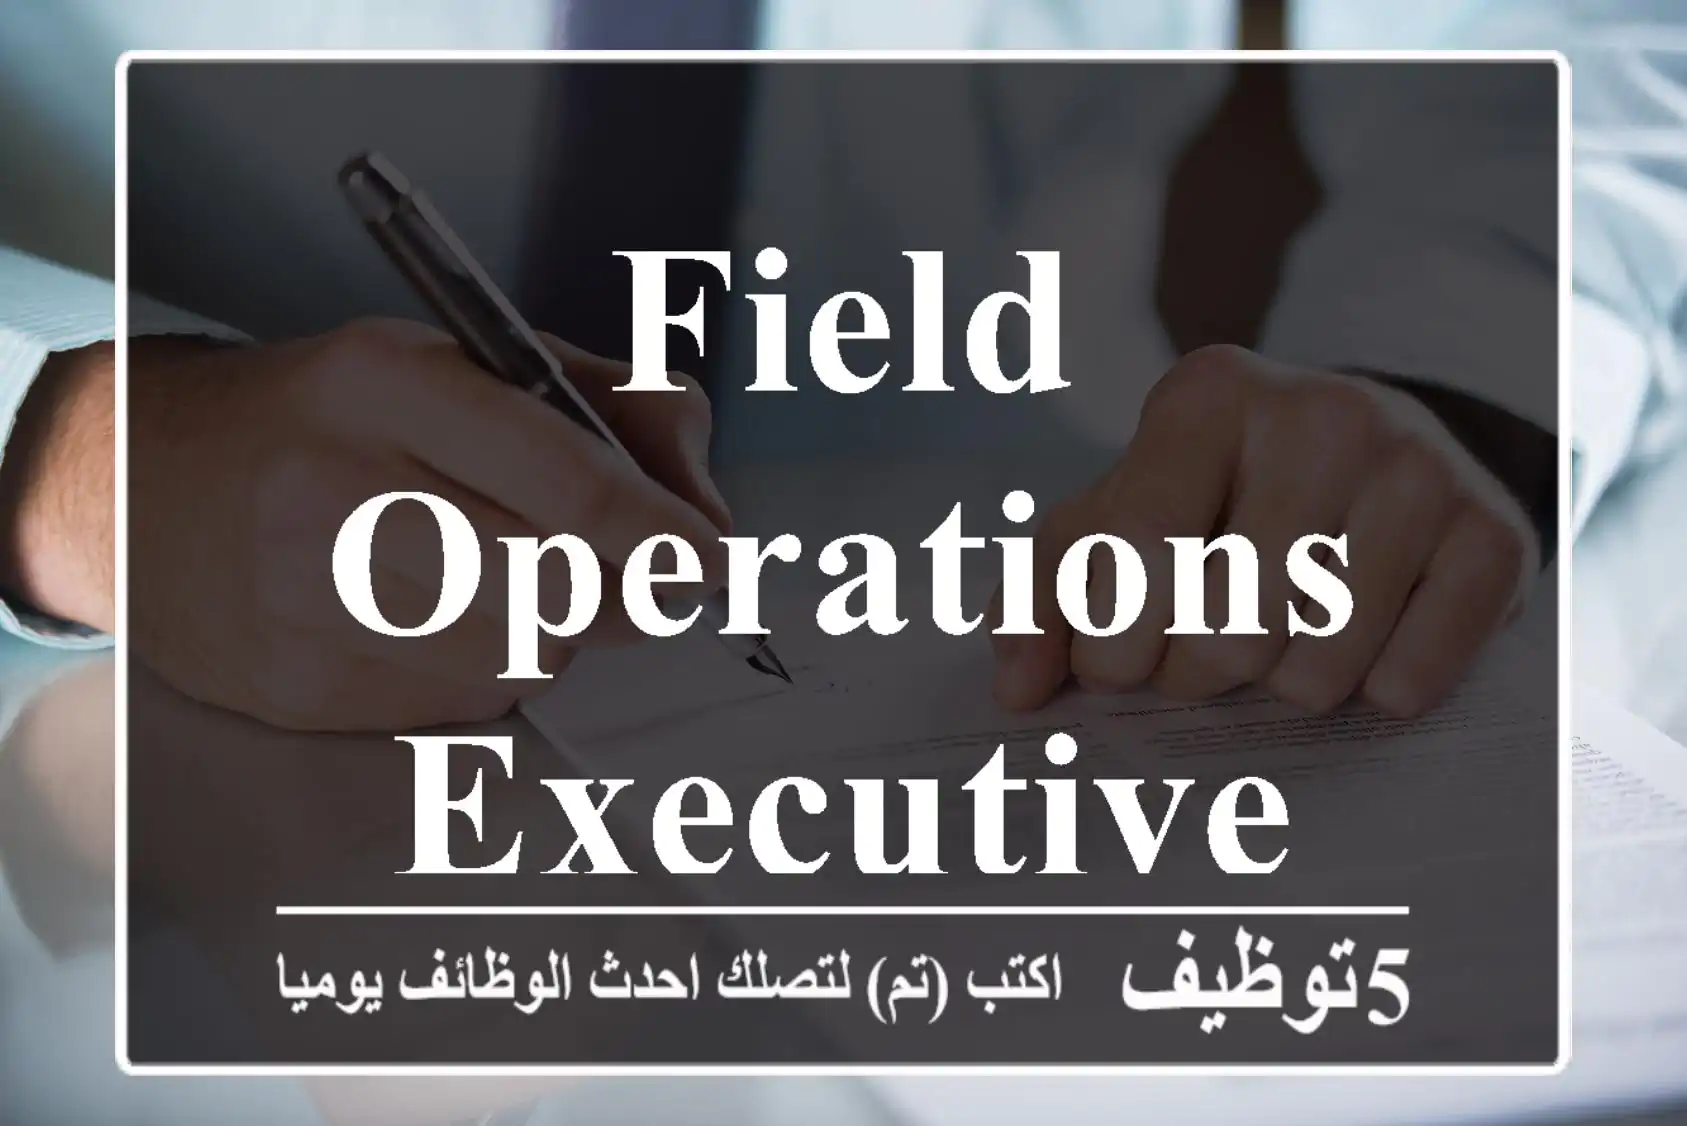 Field Operations Executive